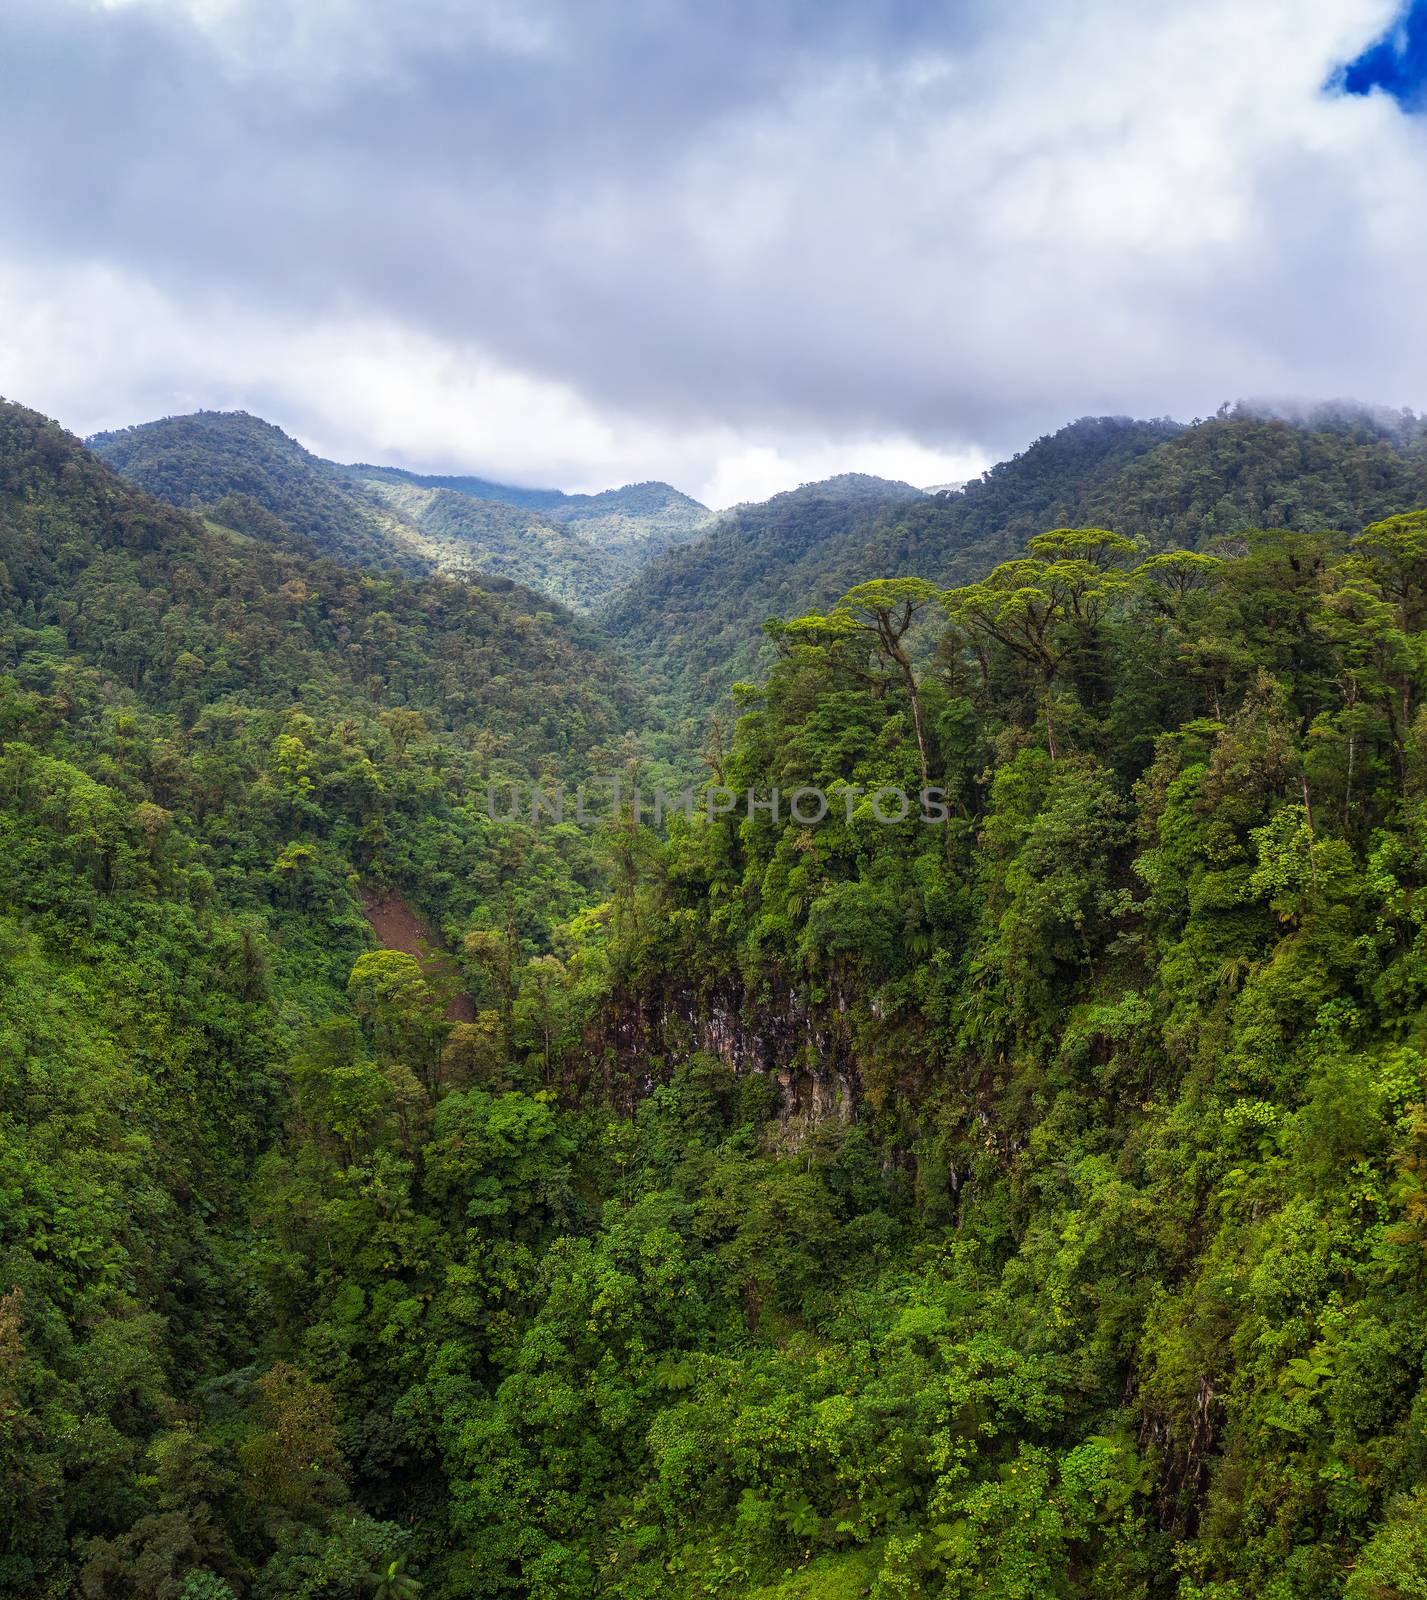 Aerial view over Juan Castro Blanco National Park in Costa Rica. This national park contains three volcanos and an area of rain and cloud forest.